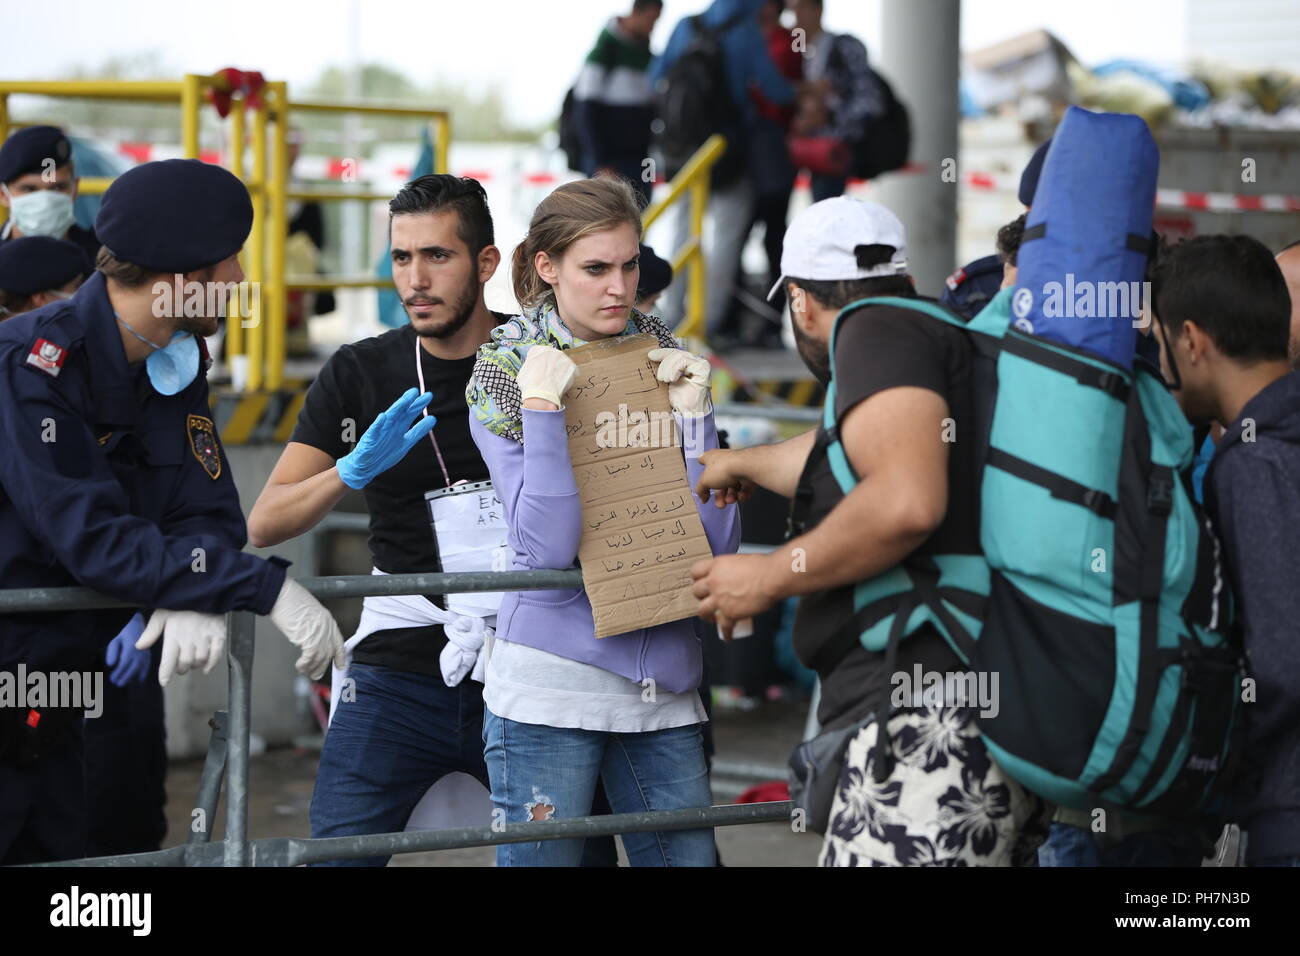 Nickelsdorf, Burgenland, Austria. 15th Sep, 2015. Aid workers seen helping refugees.The Austrian military took control of managing arriving Refugees at the Austrian/Slovenian border Crossing Spielfeld. They were supported by the Christian NGO Caritas. The refugees were mostly from Syria, Afghanistan and Iraq. Credit: Stanislav Jenis/SOPA Images/ZUMA Wire/Alamy Live News Stock Photo